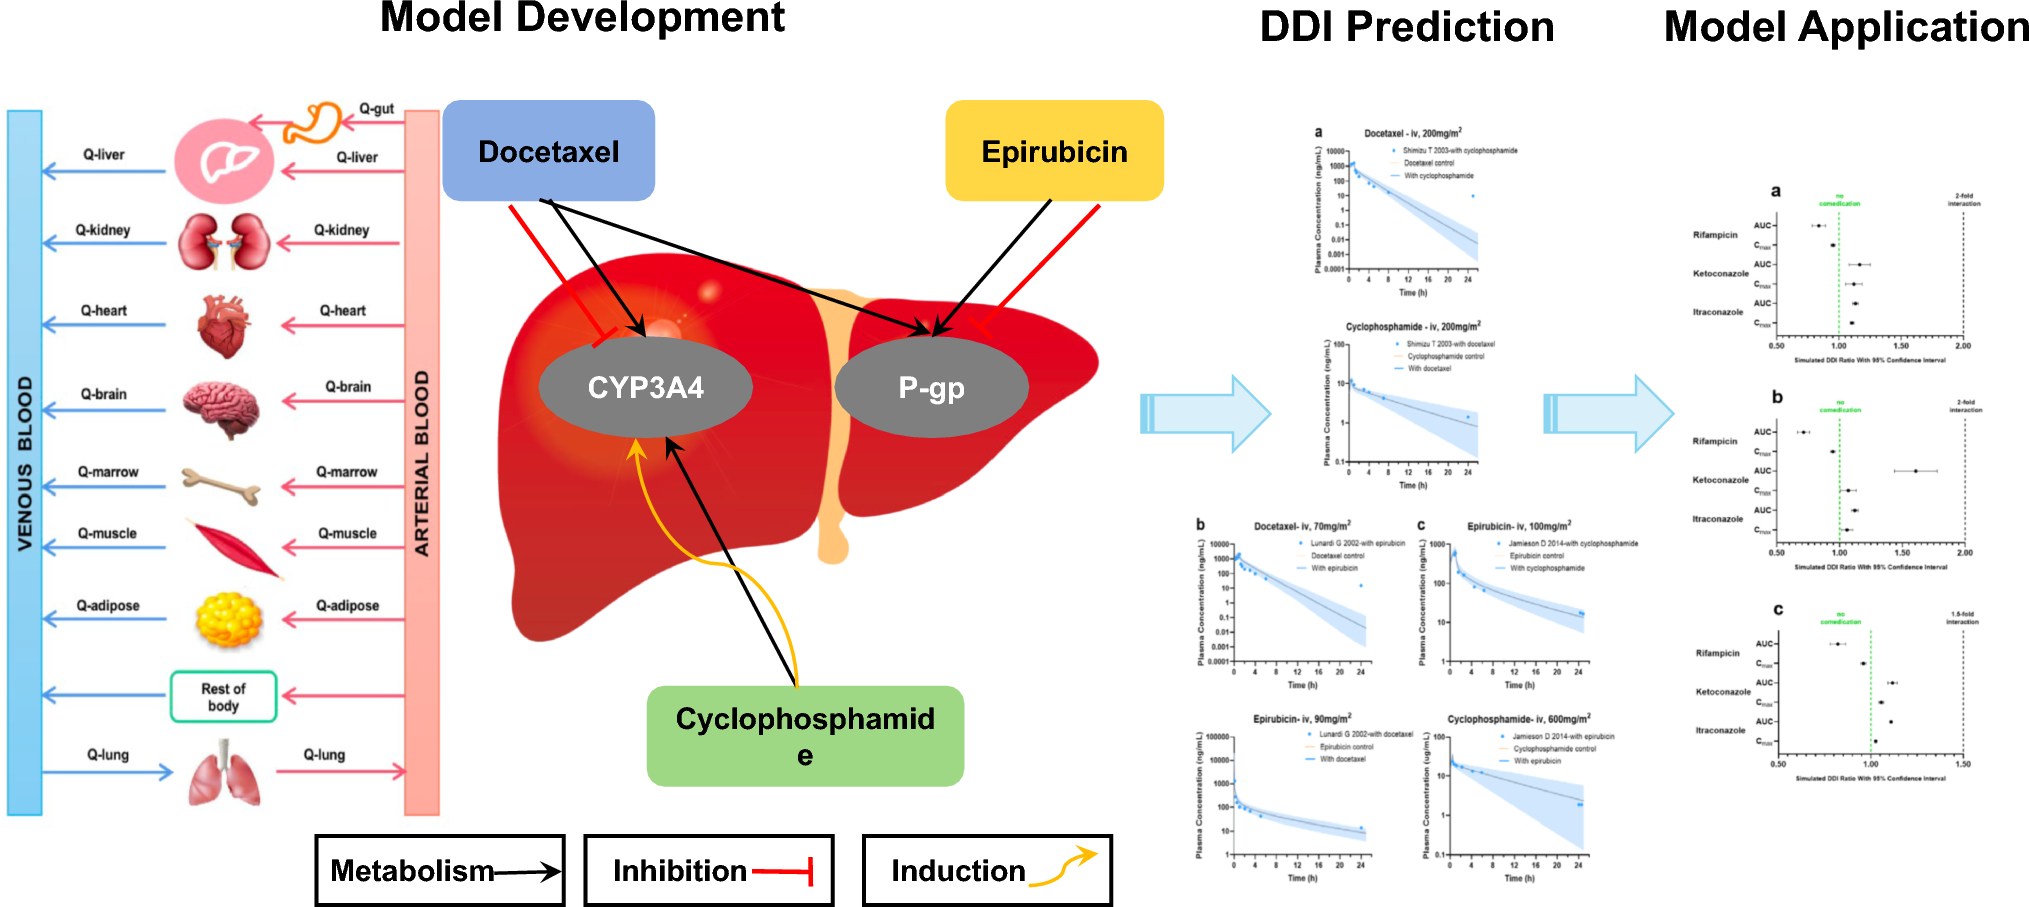 Docetaxel, cyclophosphamide, and epirubicin: application of PBPK modeling to gain new insights for drug-drug interactions